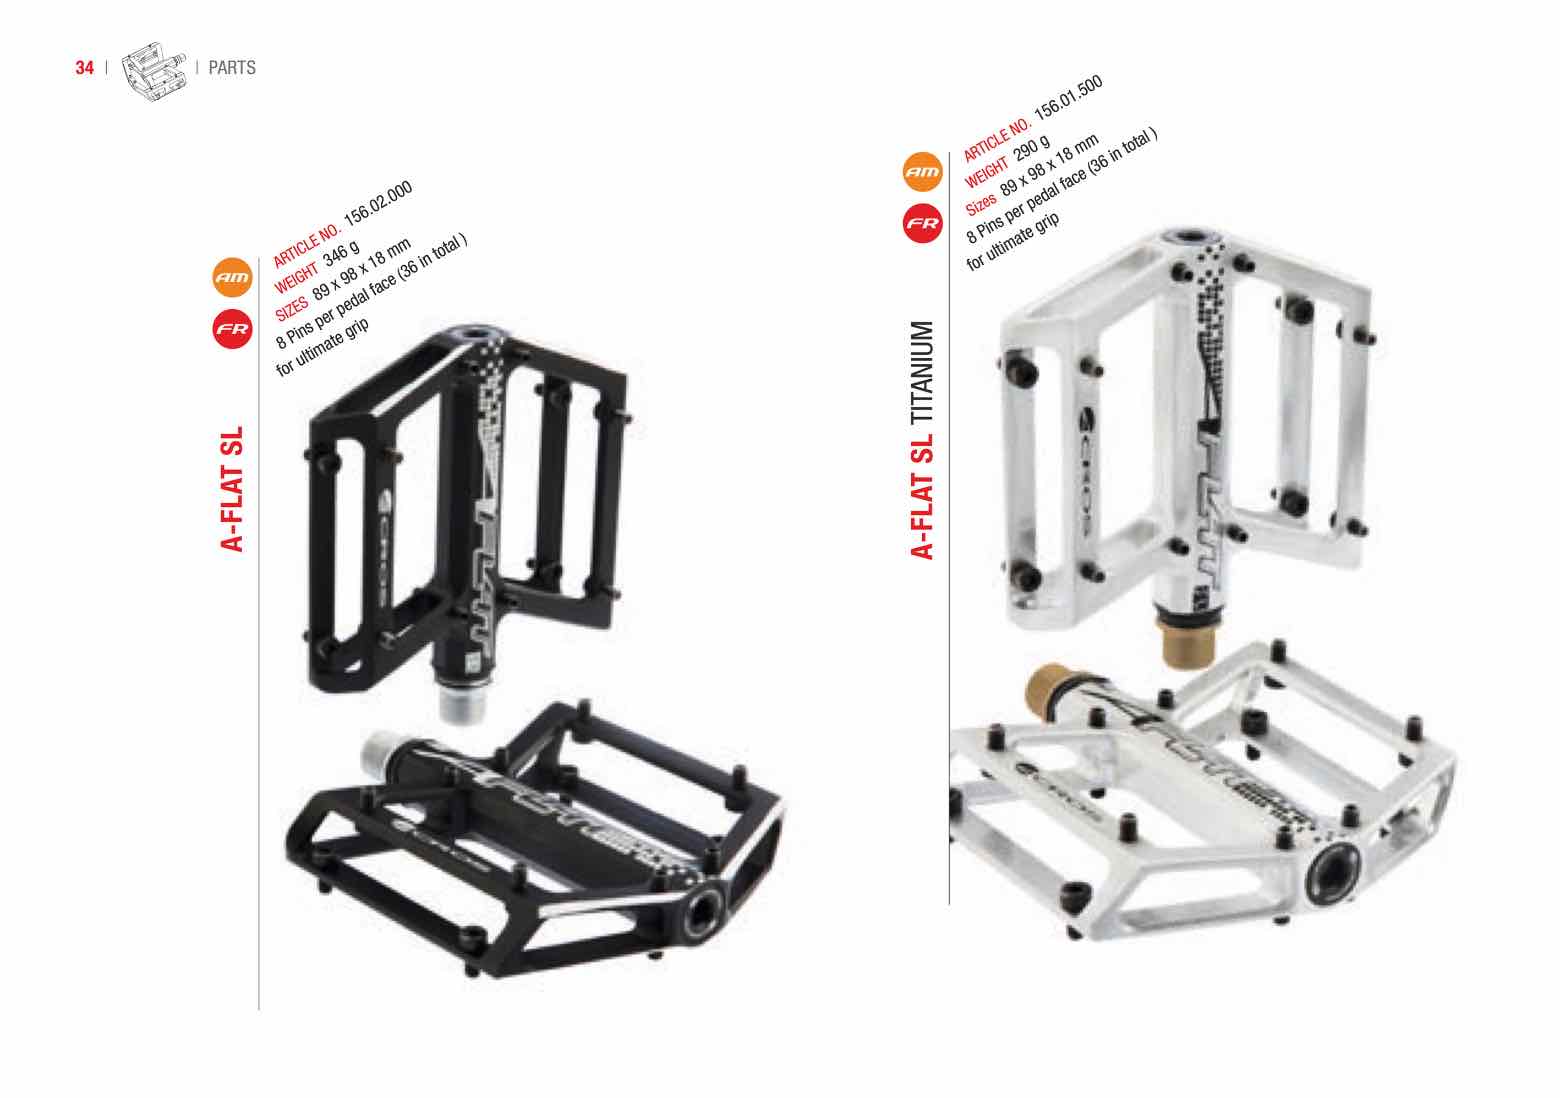 Acros - Product Catalog 2014 page 34 main image